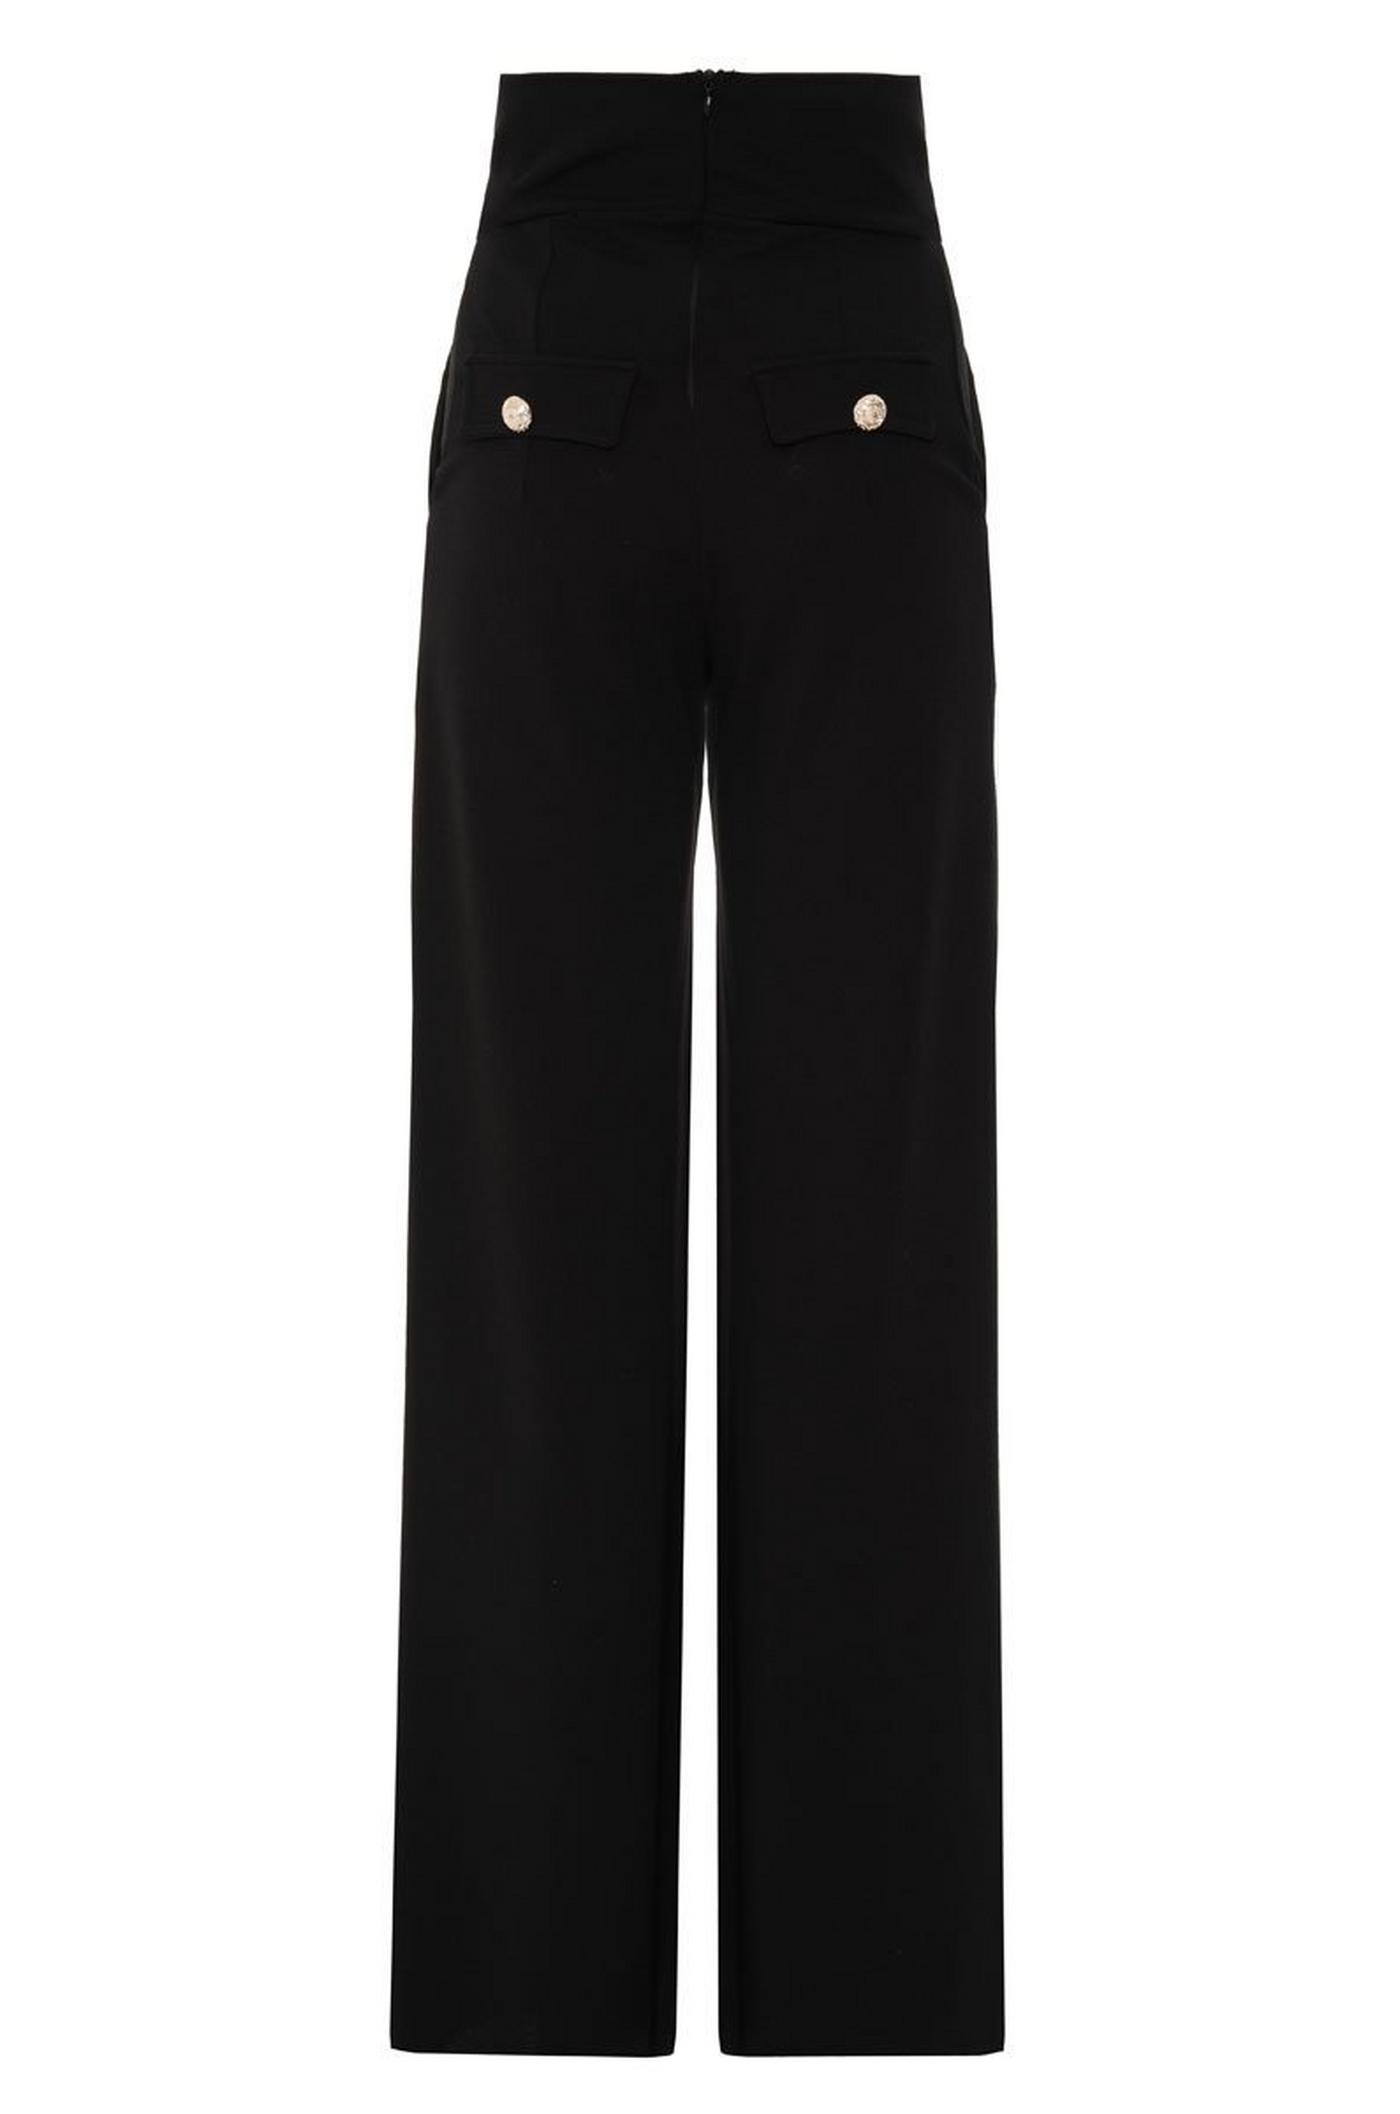 Black Crepe High Wasted Button Trousers